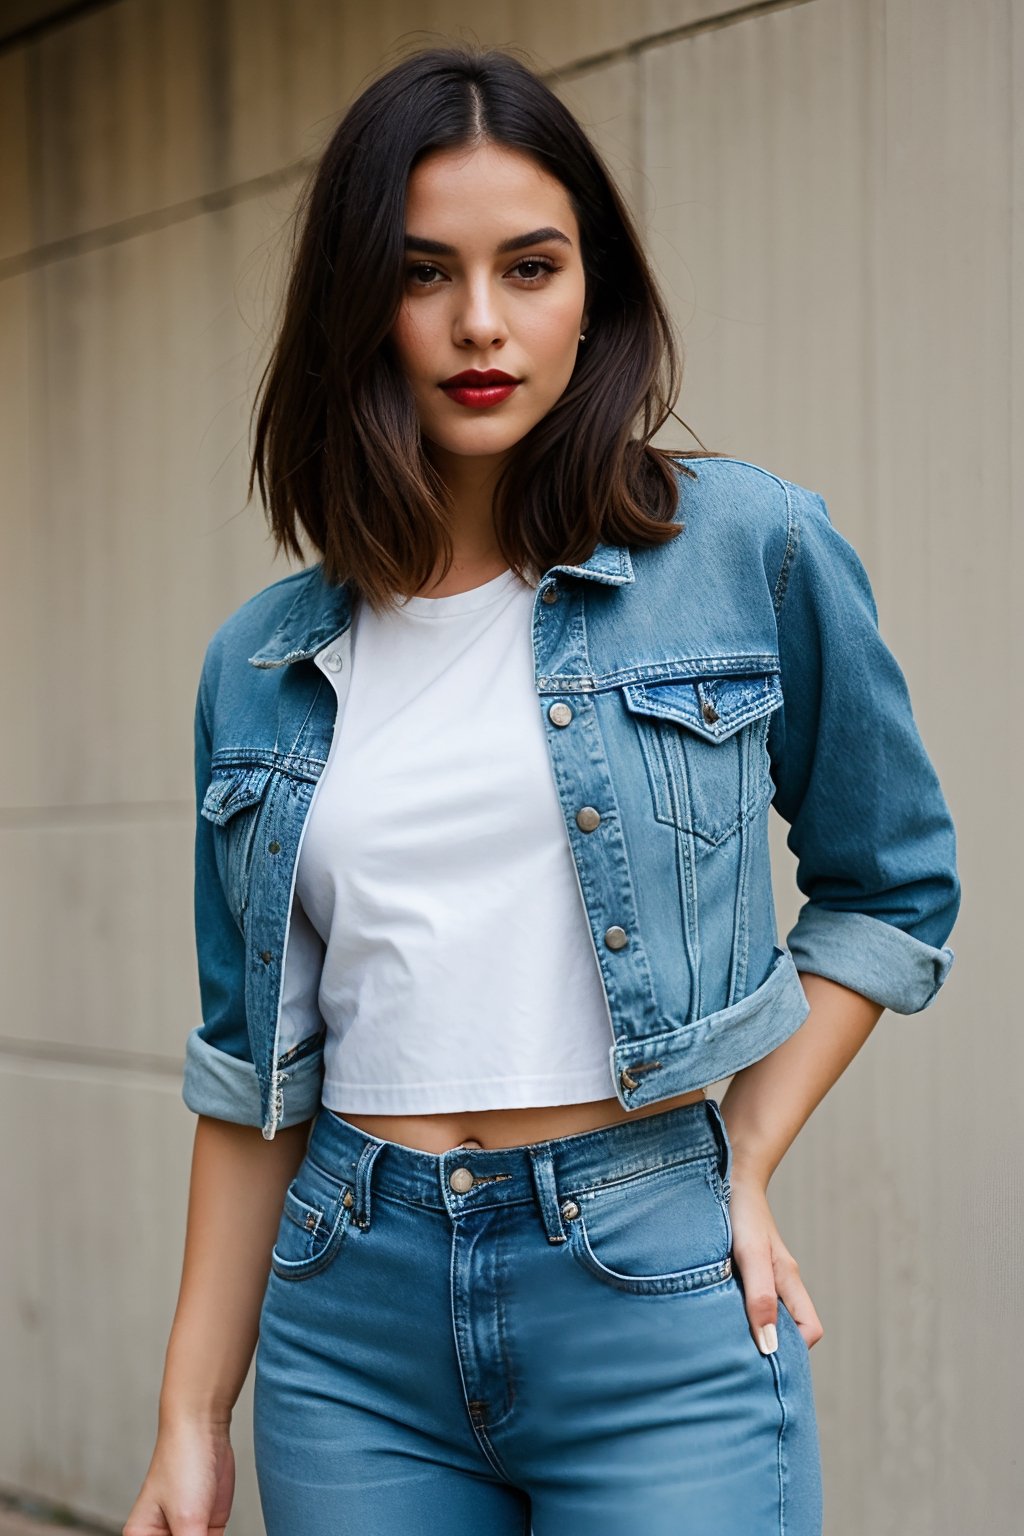 beautiful face, hot dark lips, wearing cropped denim jacket and tight levis jeans in light blue color